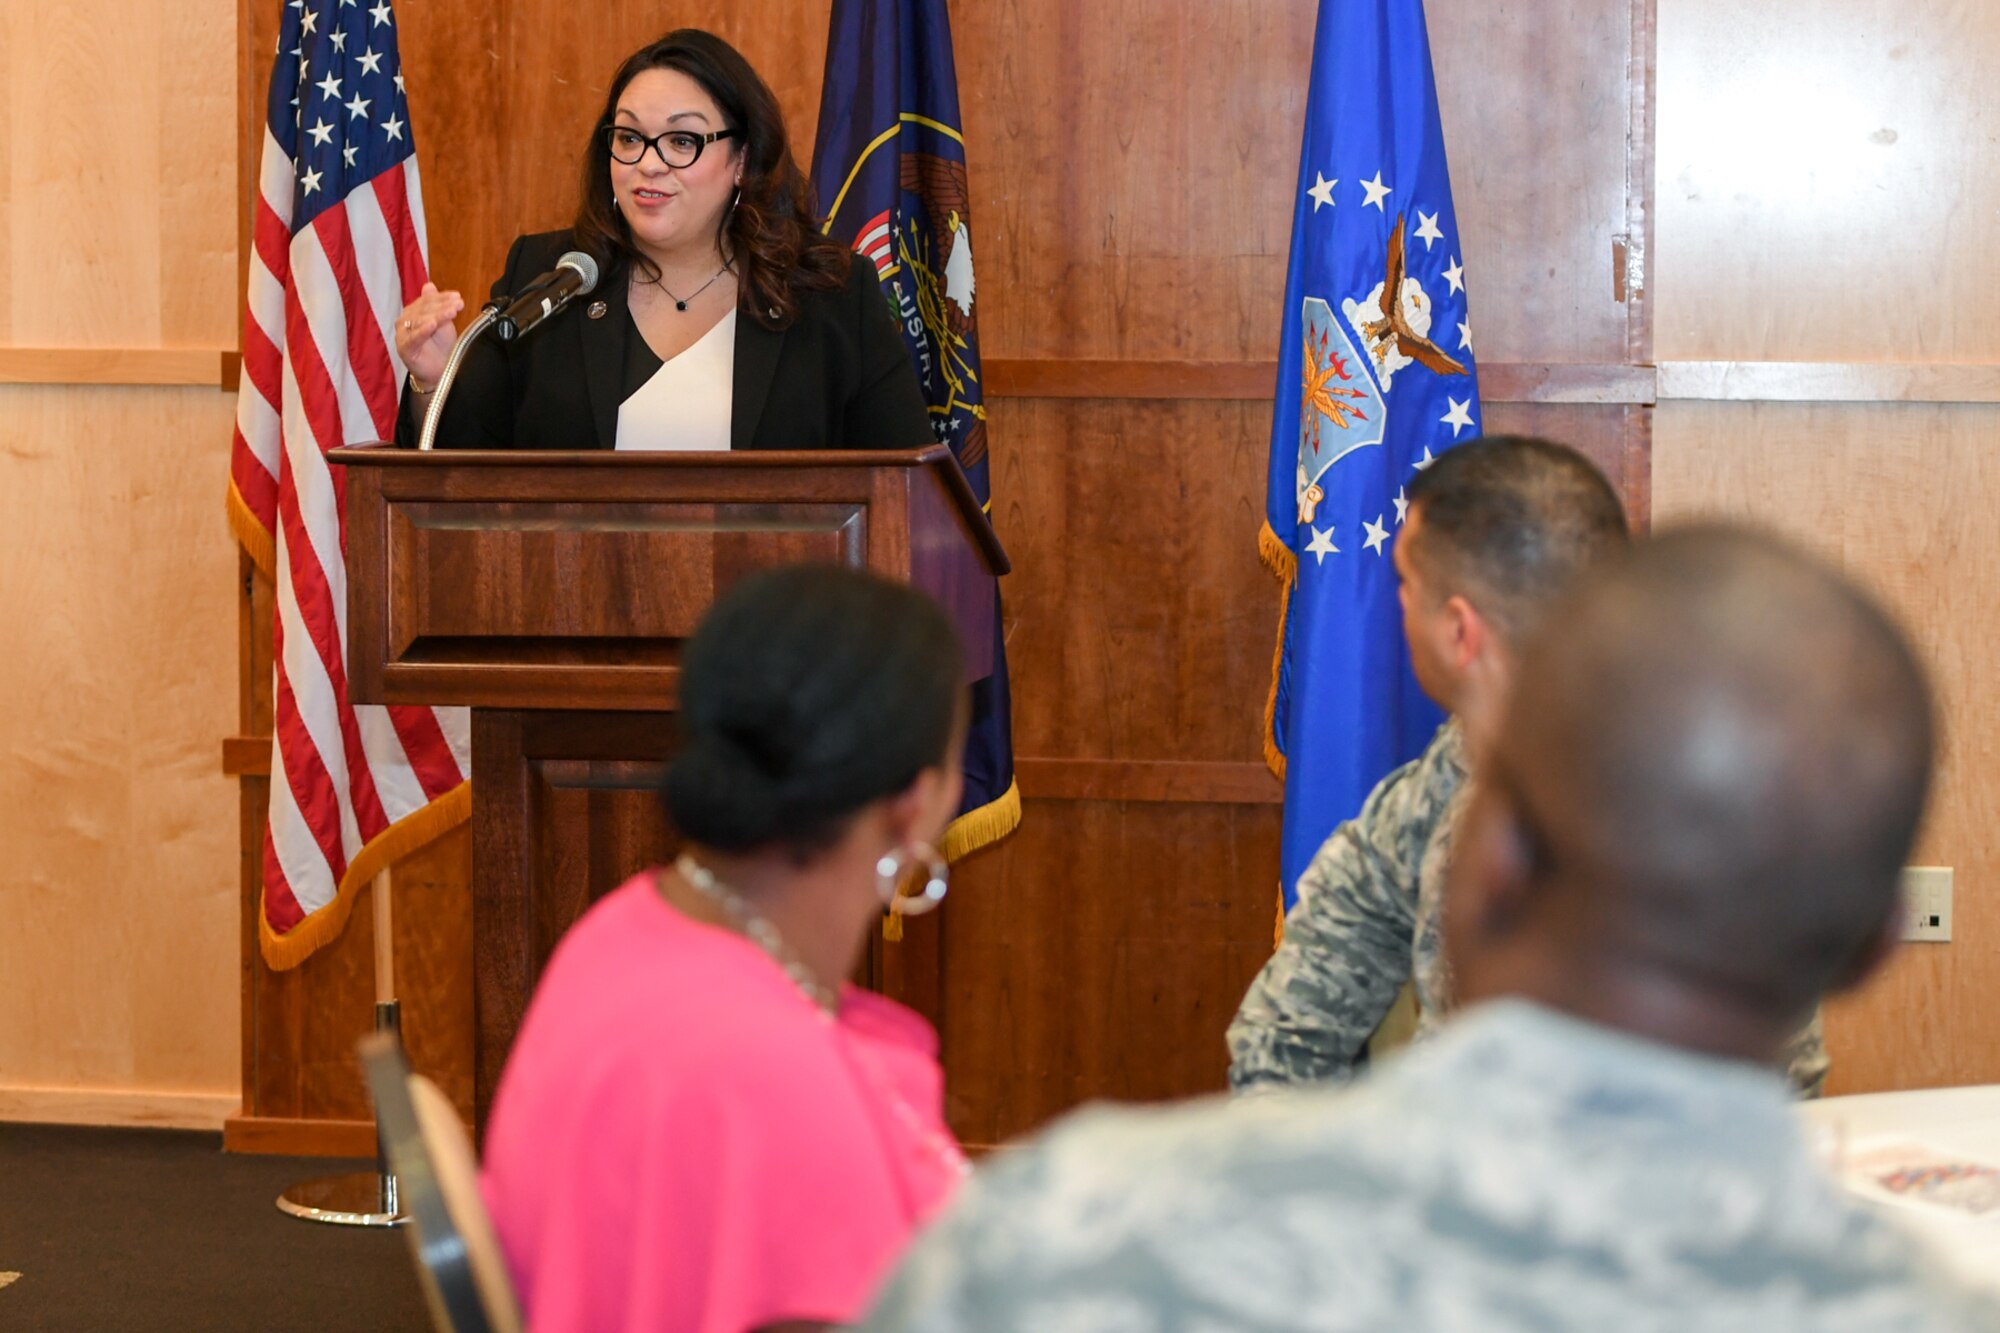 Utah state Sen. Luz Escamilla speaks during the Hispanic Heritage Awareness Luncheon at Hill Air Force Base Sept. 20, 2018. Sen. Escamilla, elected in 2008, represents District 1 and is the senate assistant minority whip. She has also passed legislation while in the senate supporting veterans. (U.S. Air Force photo by Cynthia Griggs)